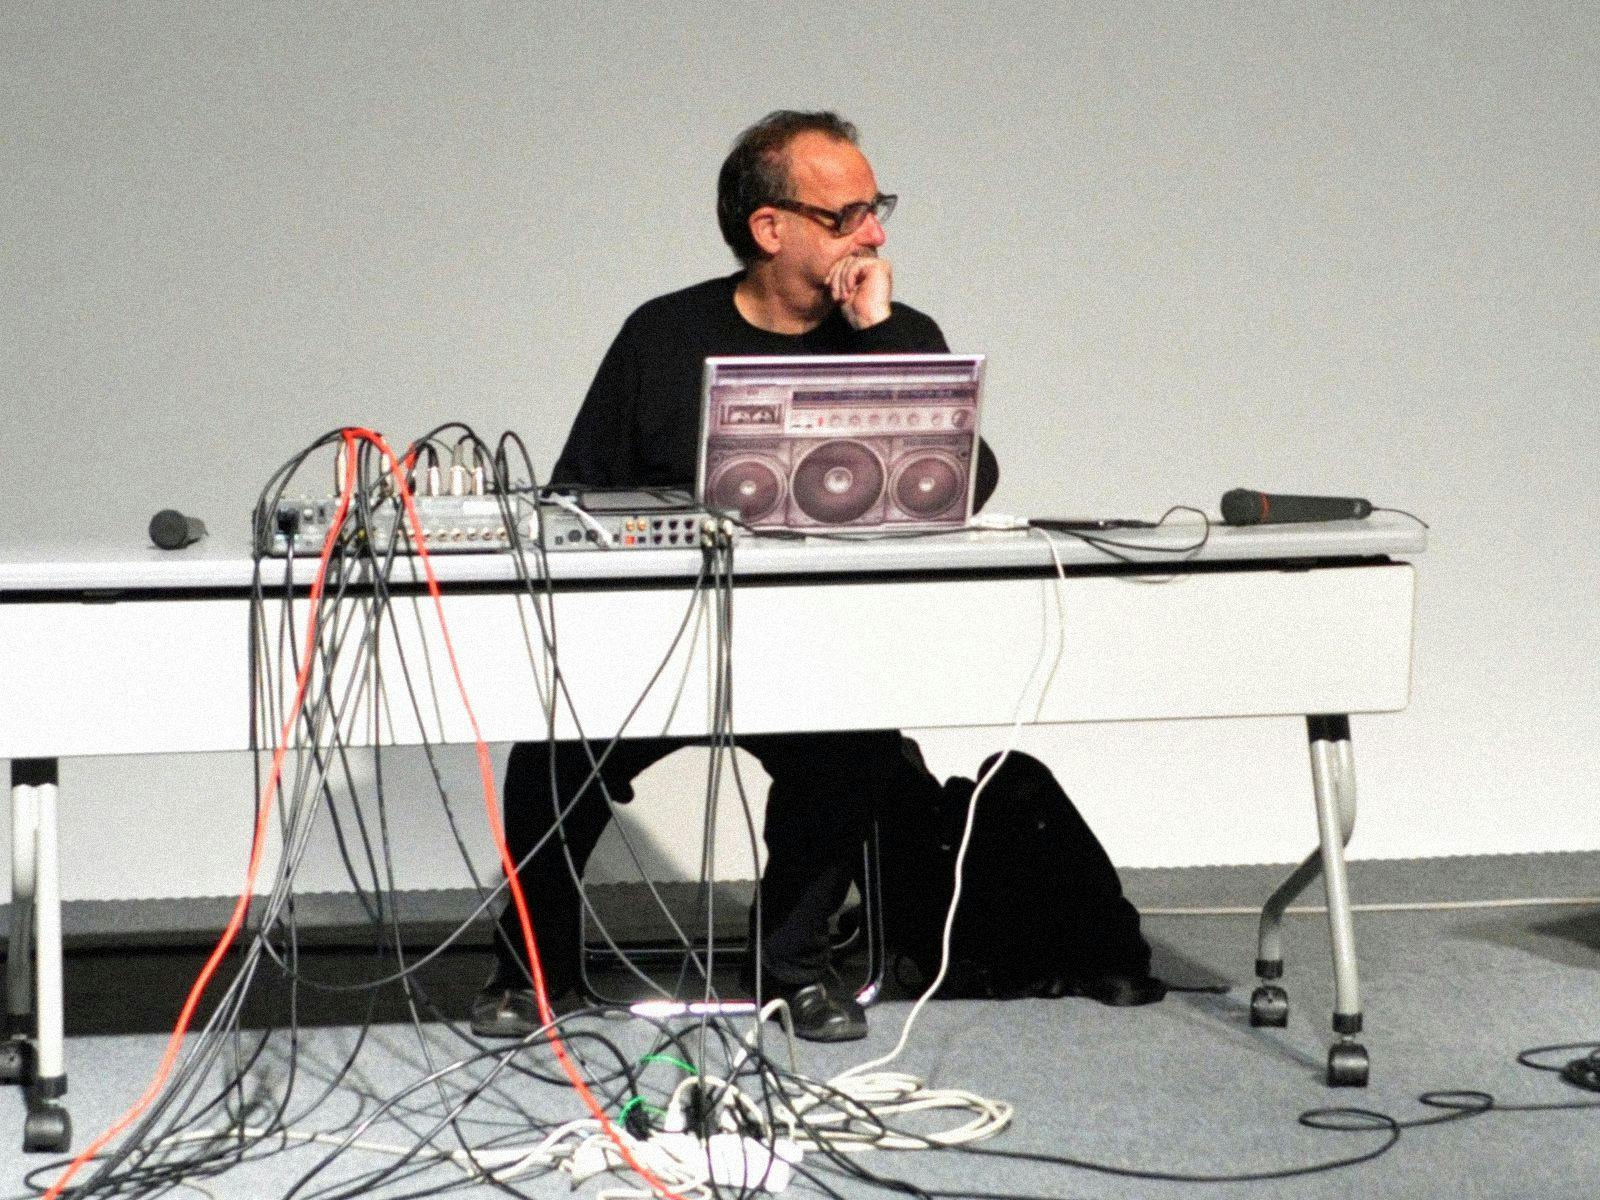 Carl Stone sits at a white desk, laptop, MIDI's and cables strewn around him.